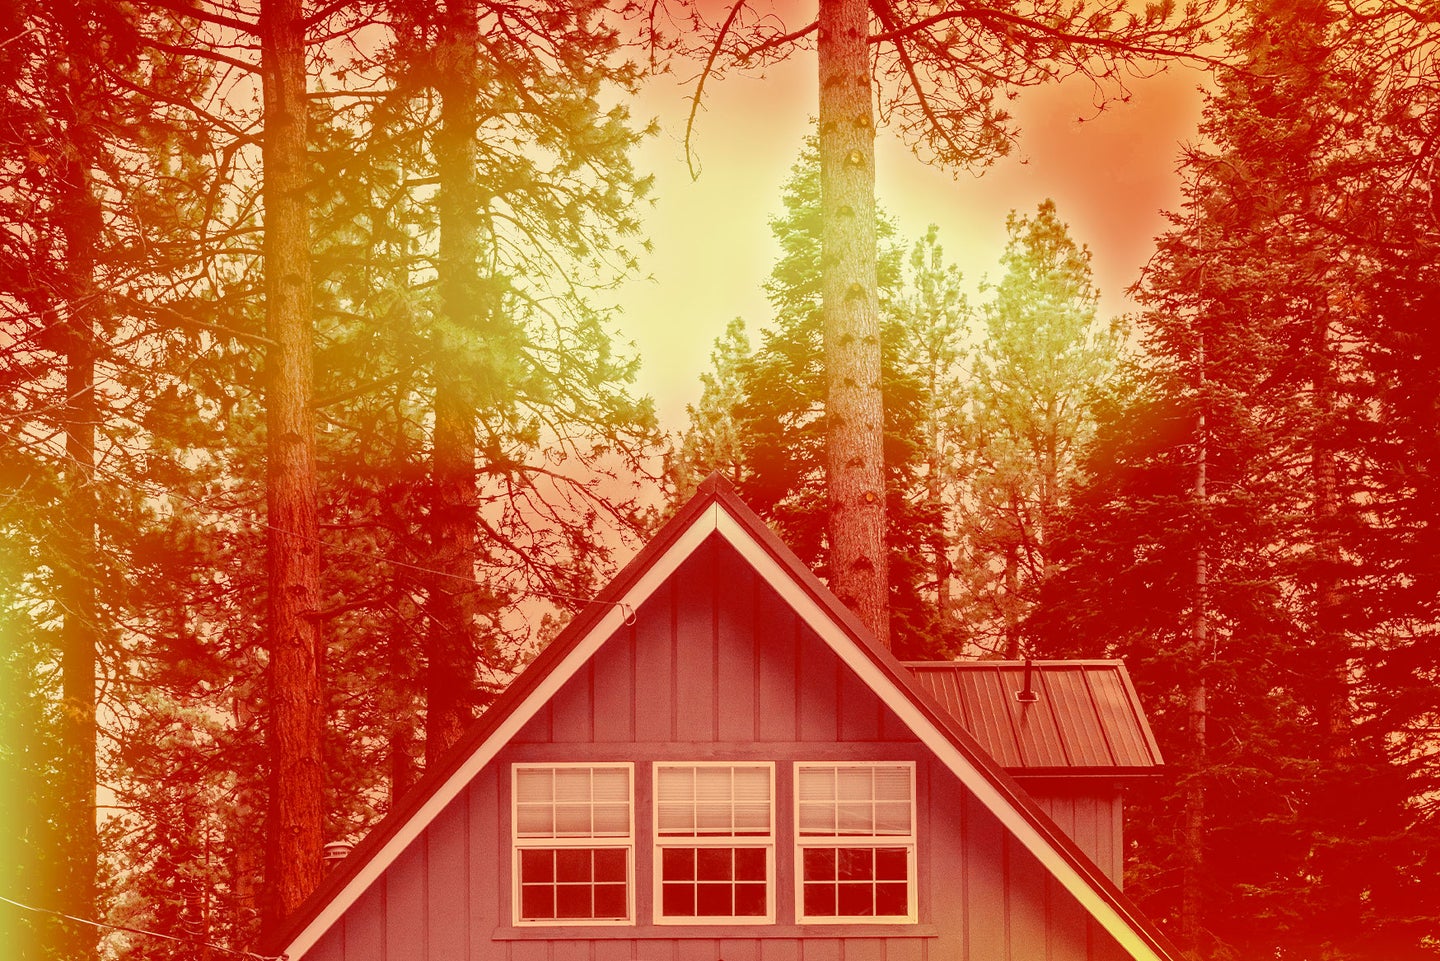 Roof of a house without AC surrounded by trees, with a red and orange color overlay.